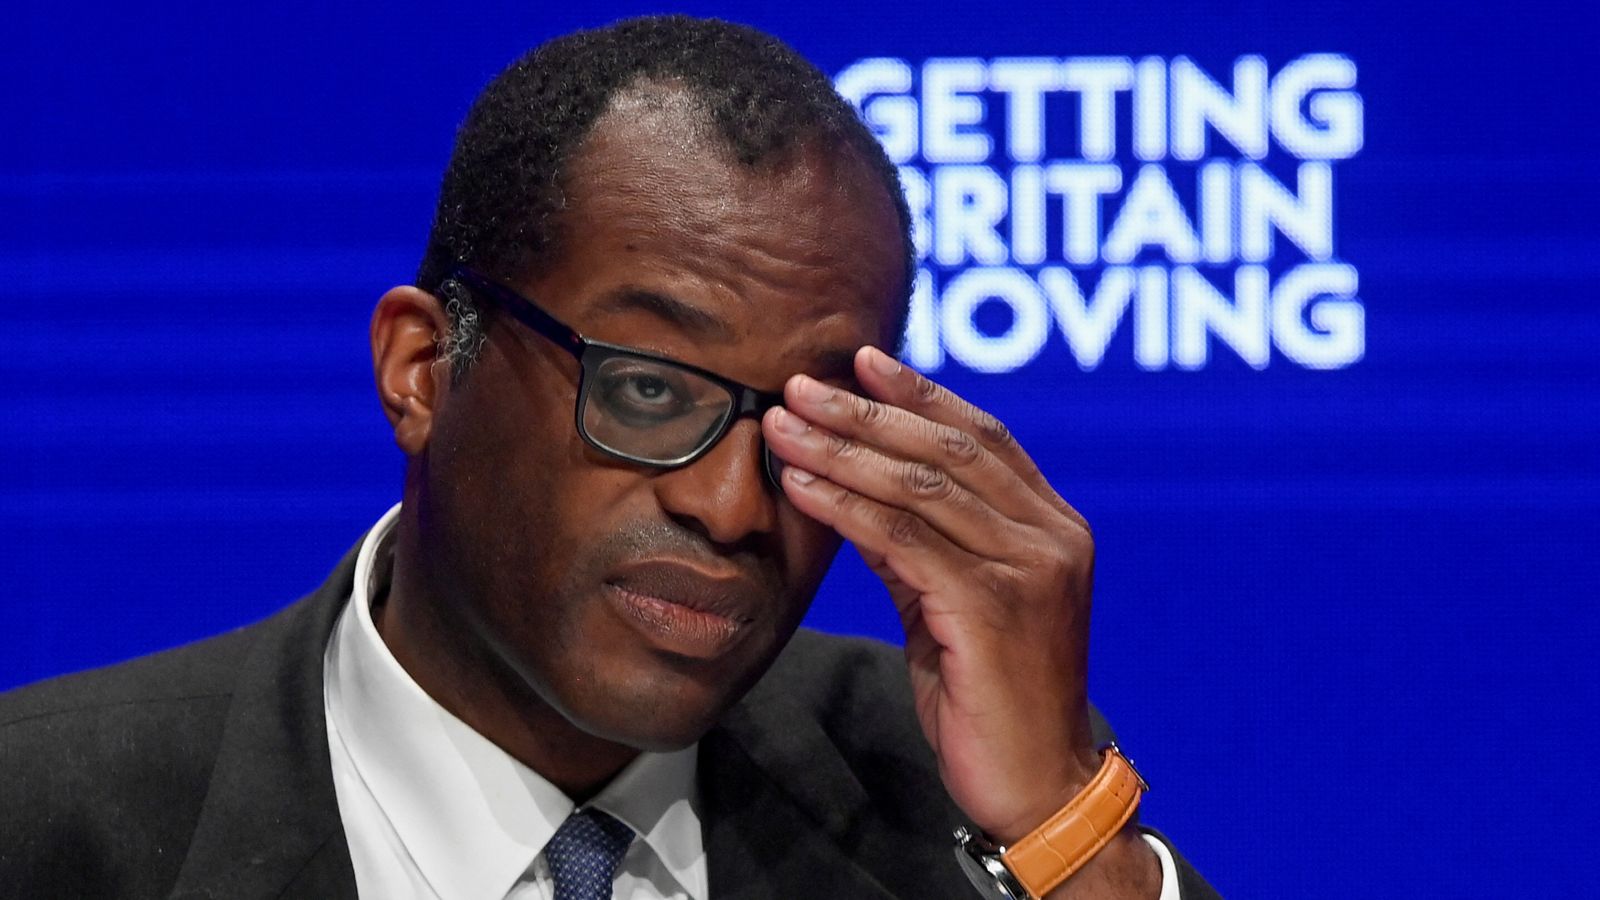 Kwasi Kwarteng: 'What a day!' Chancellor admits fiscal plan caused 'a little turbulence'